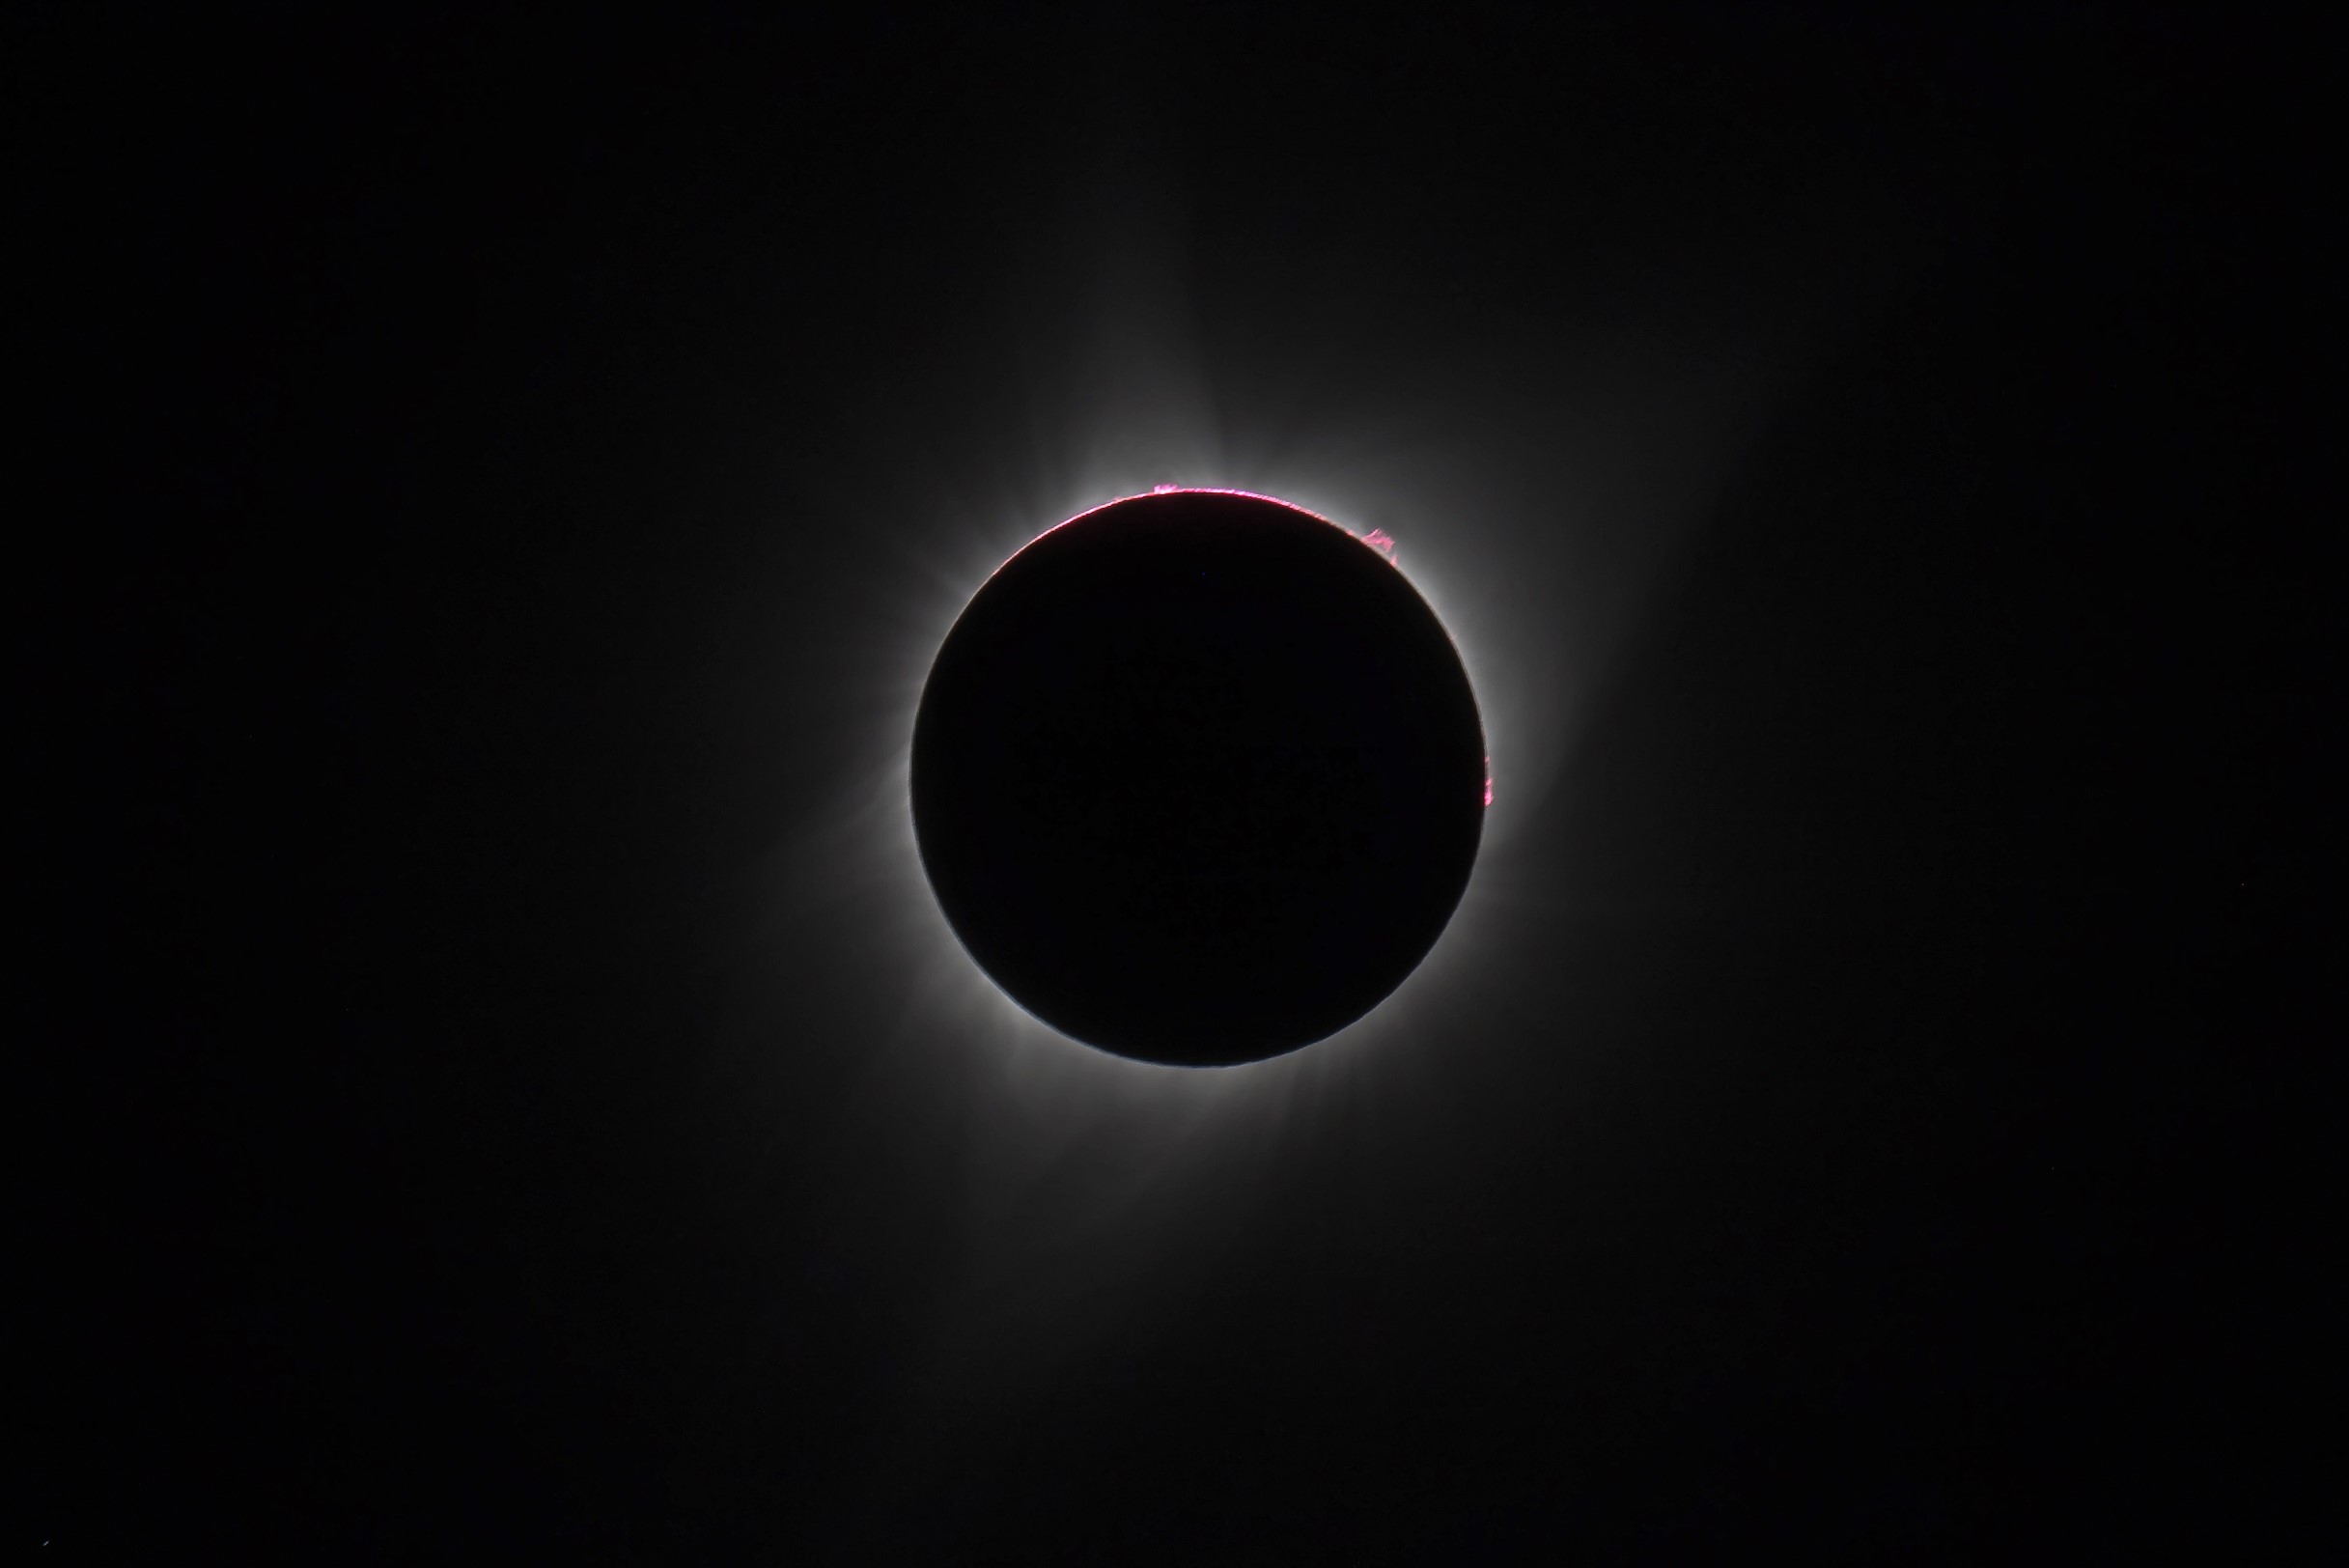 2017 Total Solar Eclipse, from Dubois, Wyoming